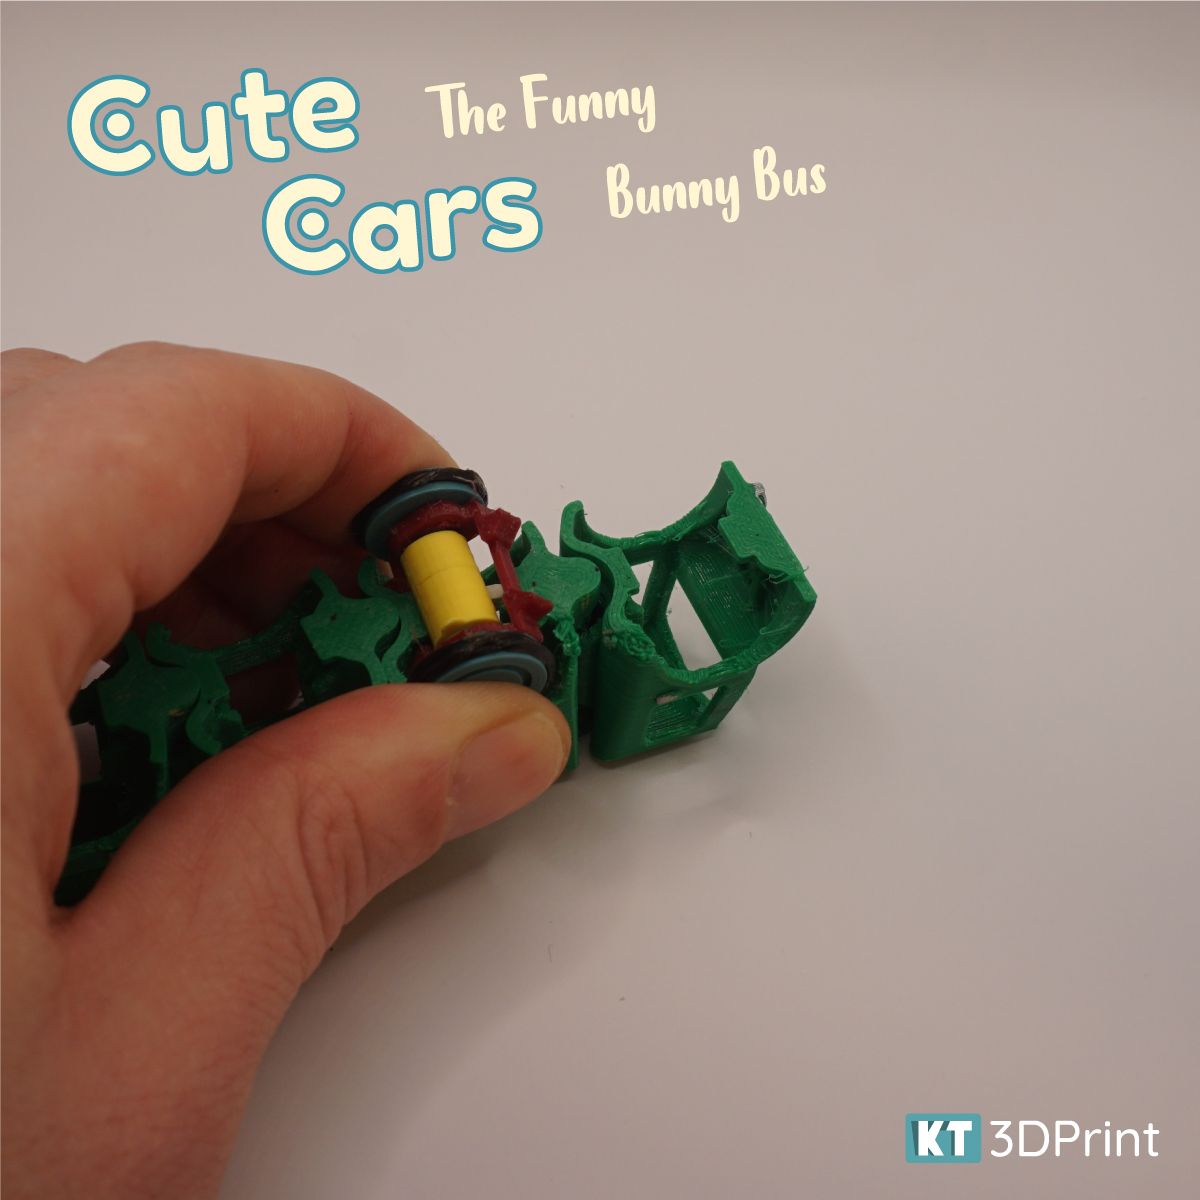 CuteCarsBunny_6.jpg Download STL file Cute Cars - Funny Bunny Bus • 3D printing object, KT3Dprint